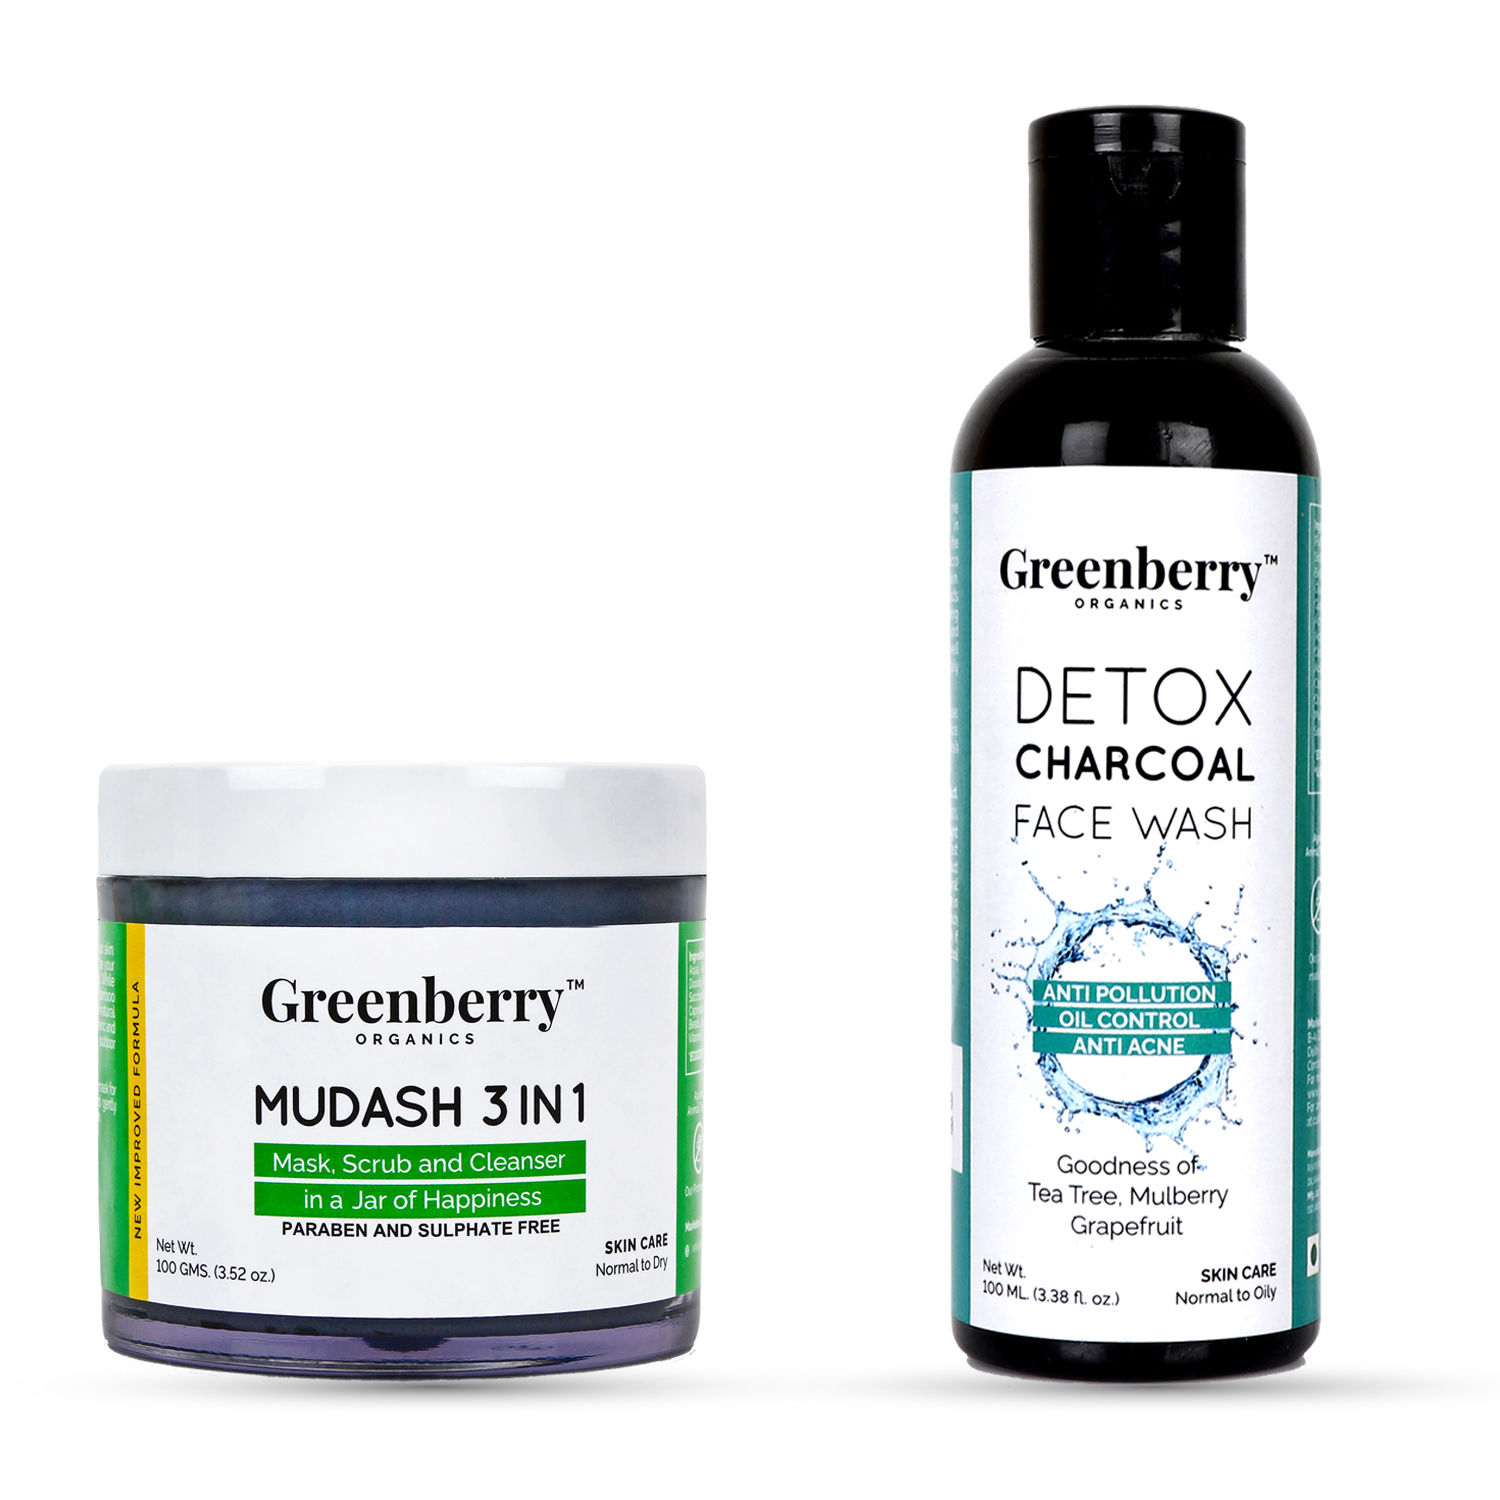 Buy Greenberry Organics Mud Ash 3 IN 1 Face Mask, Scrub & Cleanser with Charcoal Detox Face Wash (100 GMS + 100 ML) - Purplle